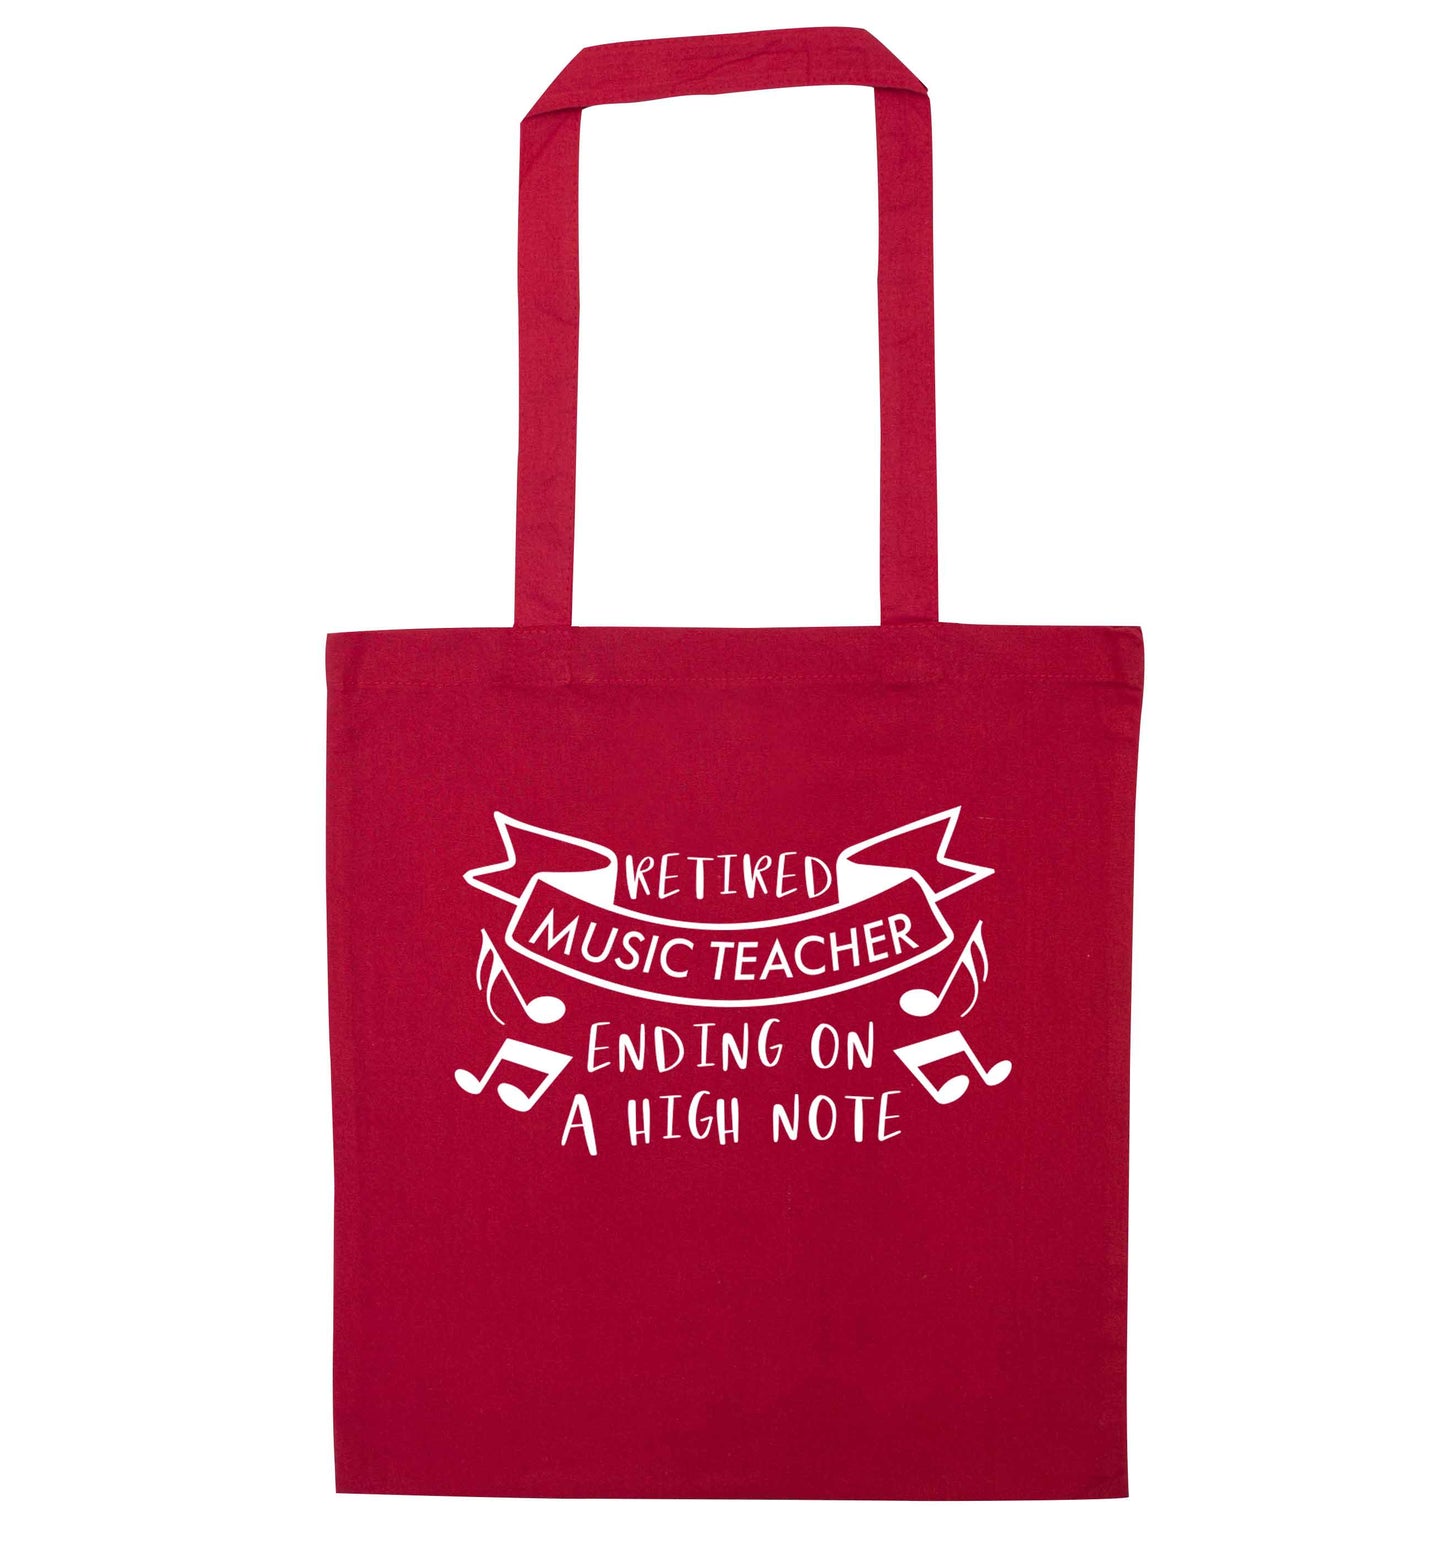 Retired music teacher ending on a high note red tote bag